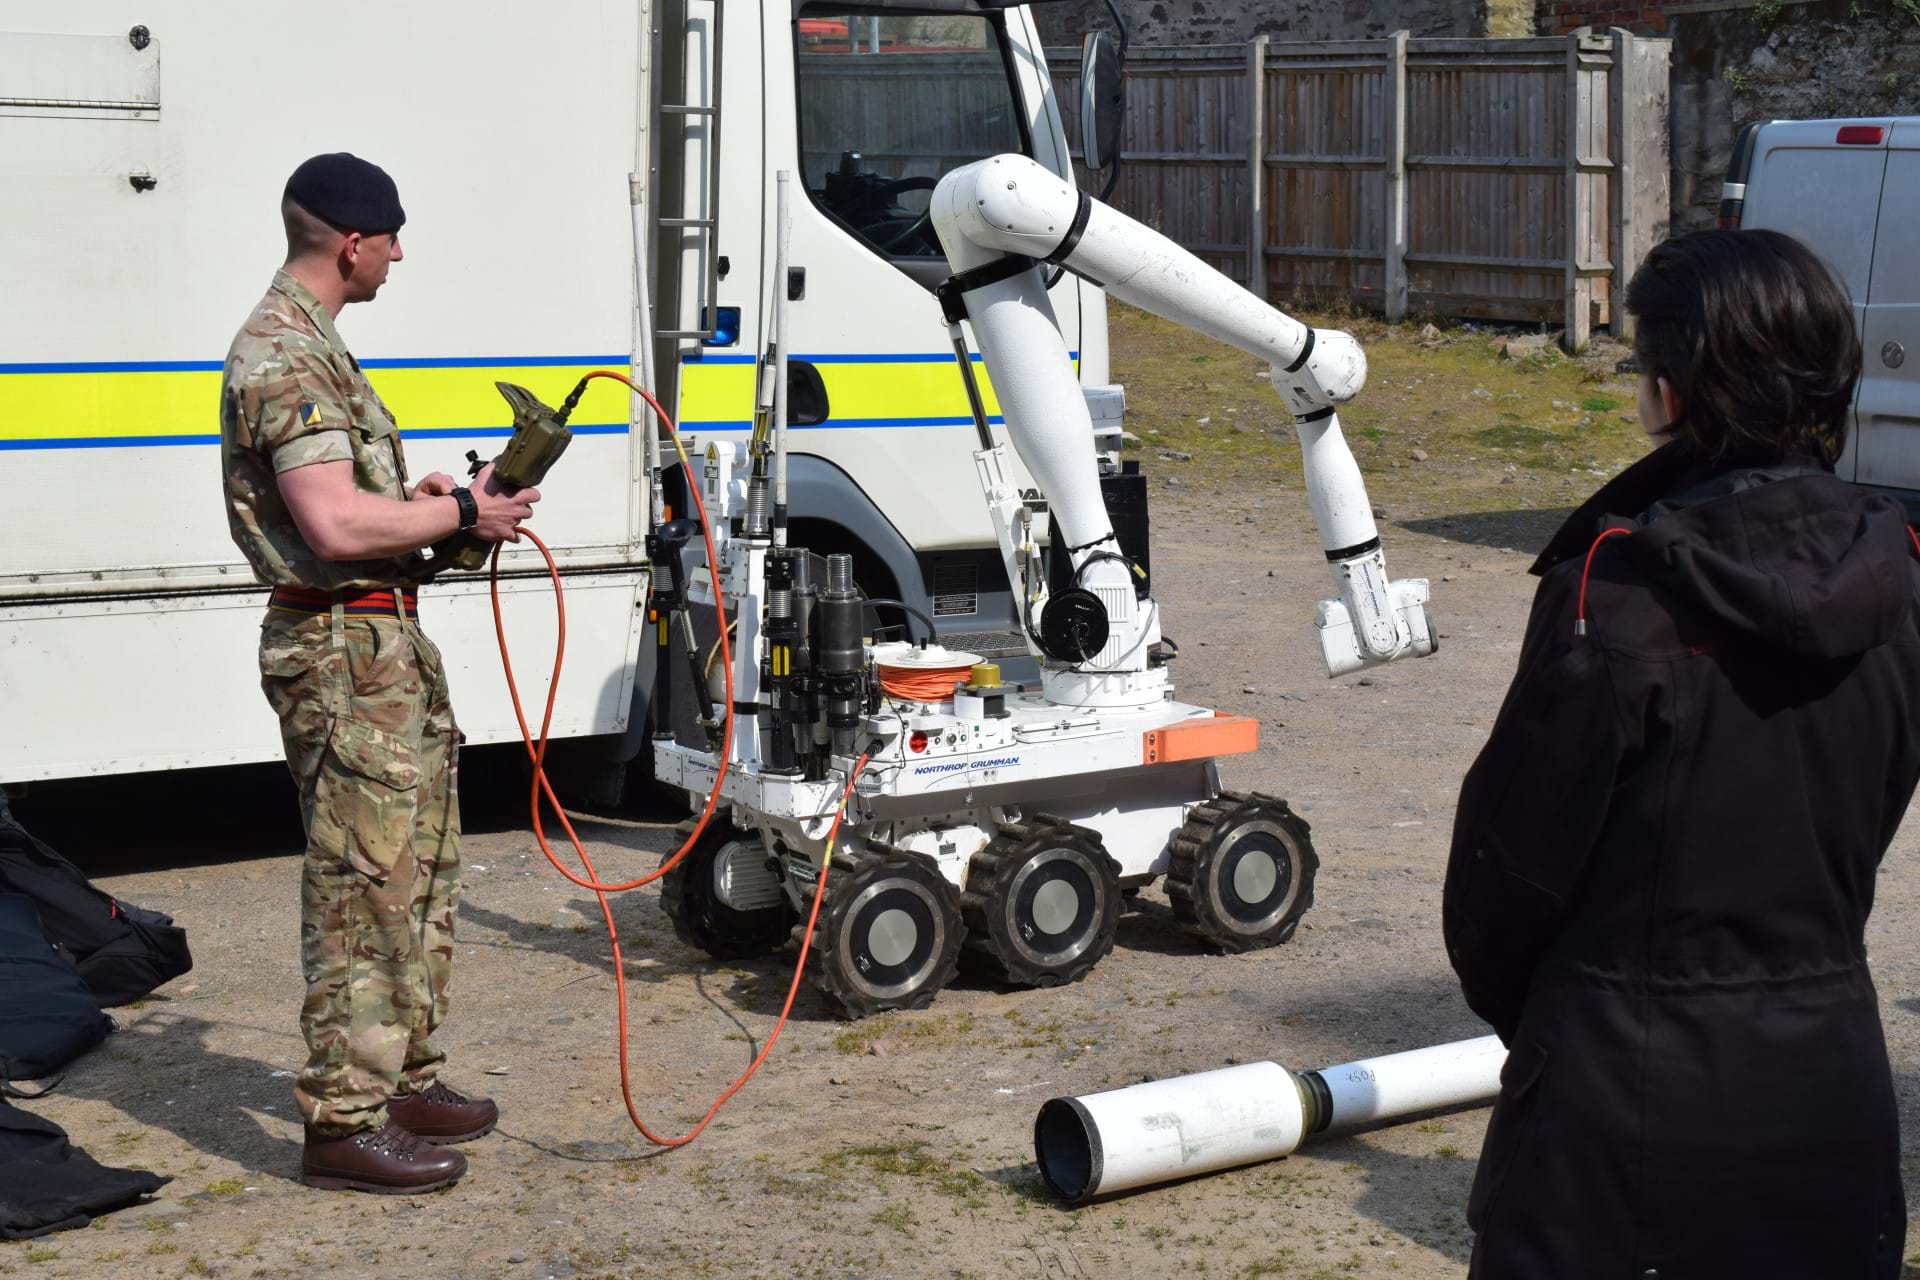 A member of the bomb disposal unit using the bomb disposal robot in front of students